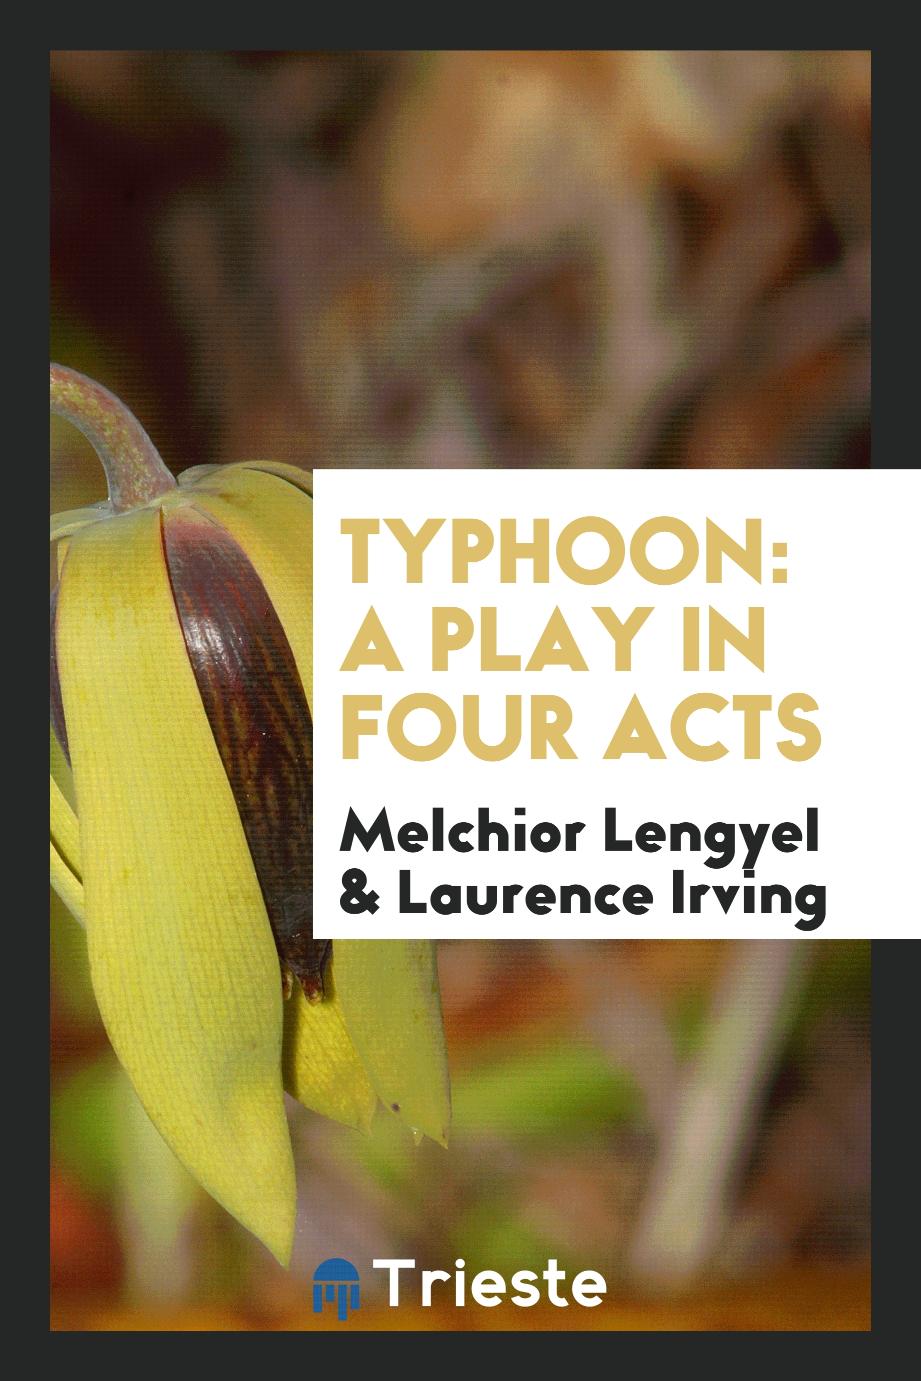 Typhoon: a play in four acts